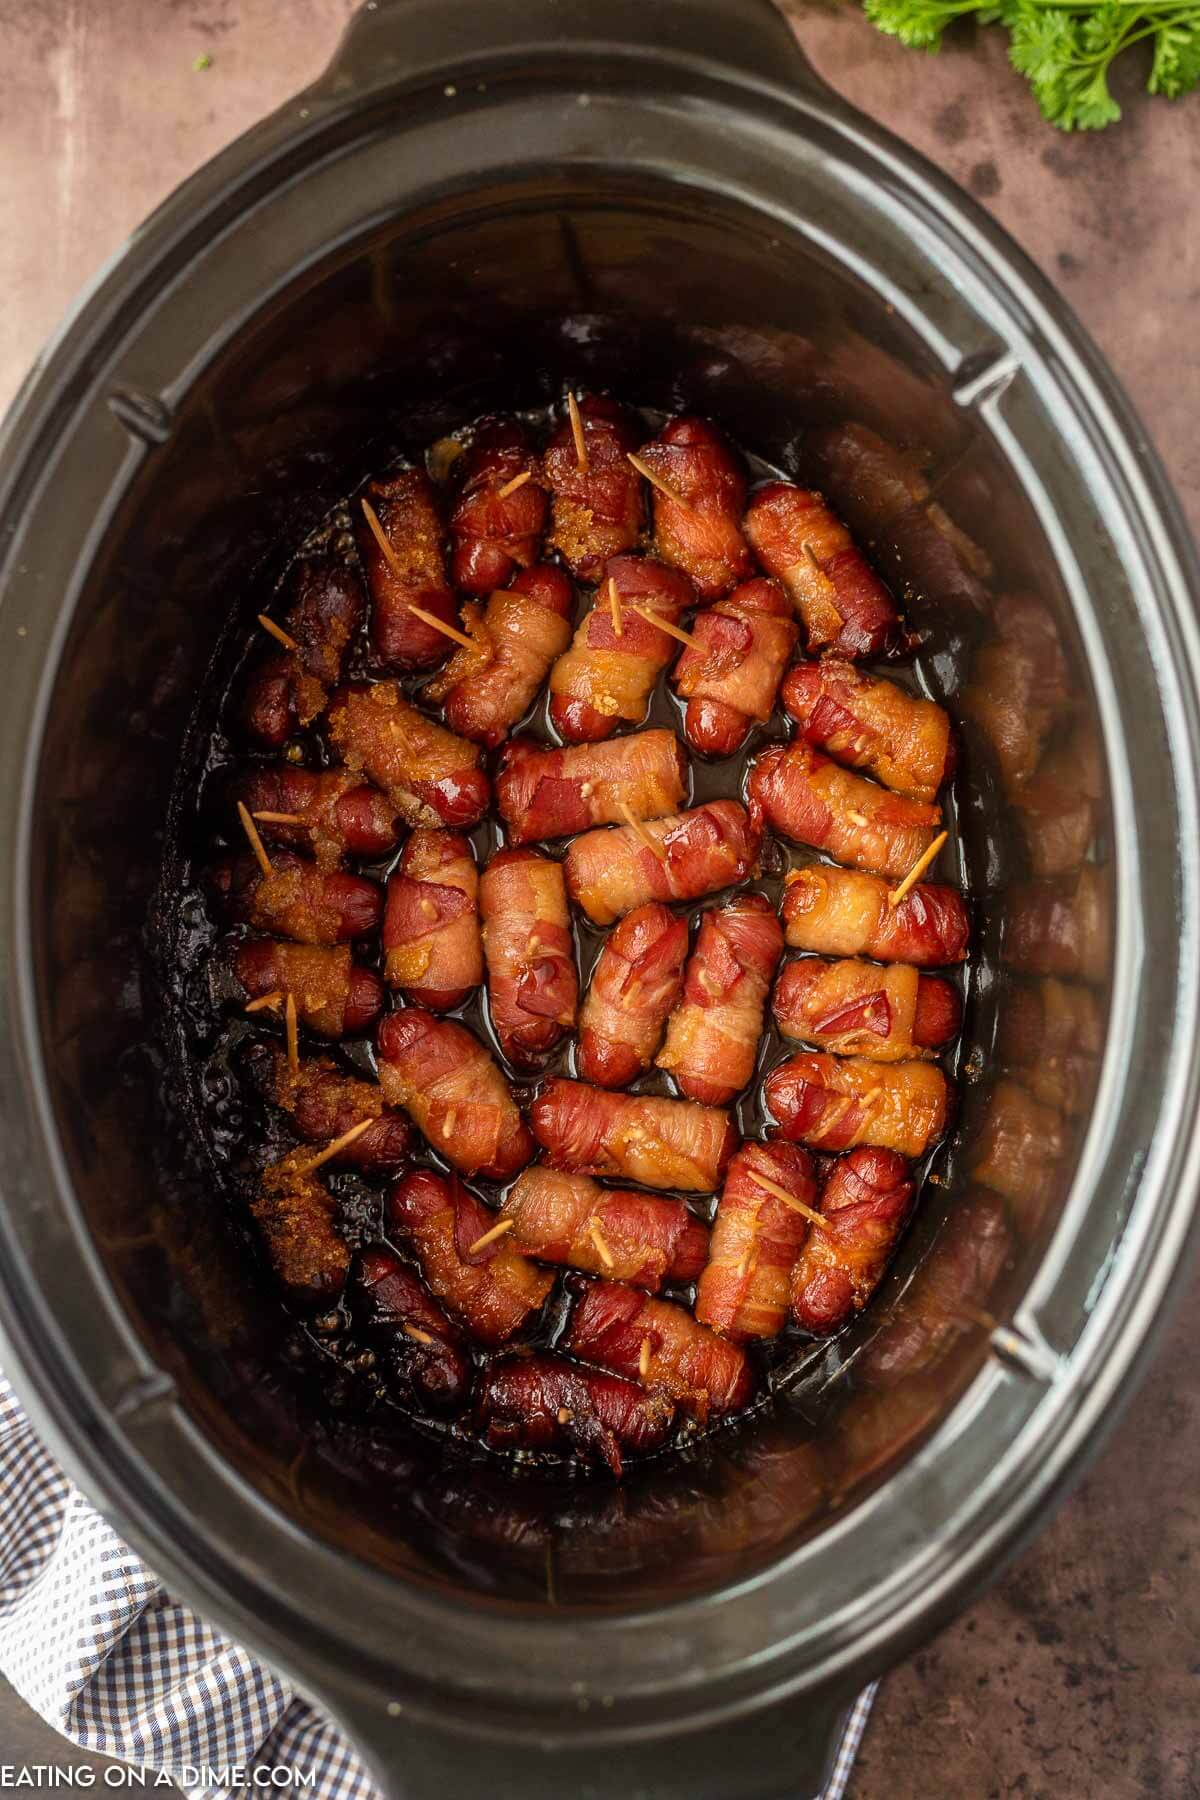 Bacon wrapped lil smokies in the slow cooker